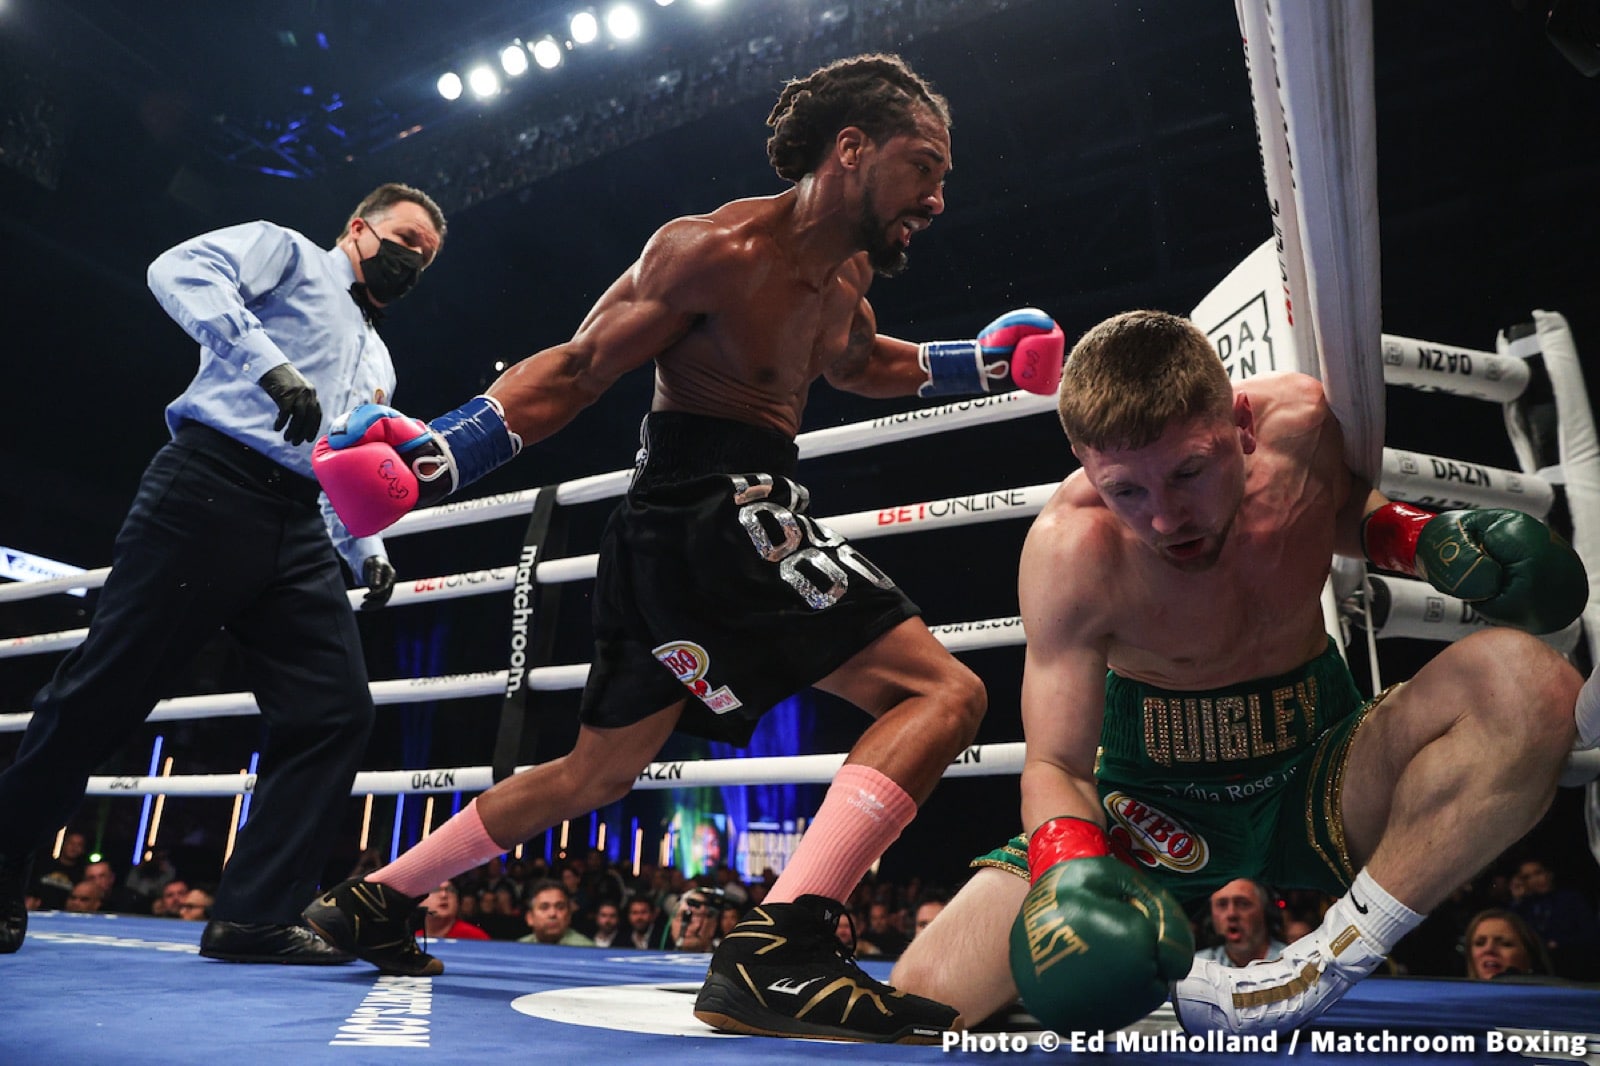 Andrade slaughters Quigley in statement fight - Results